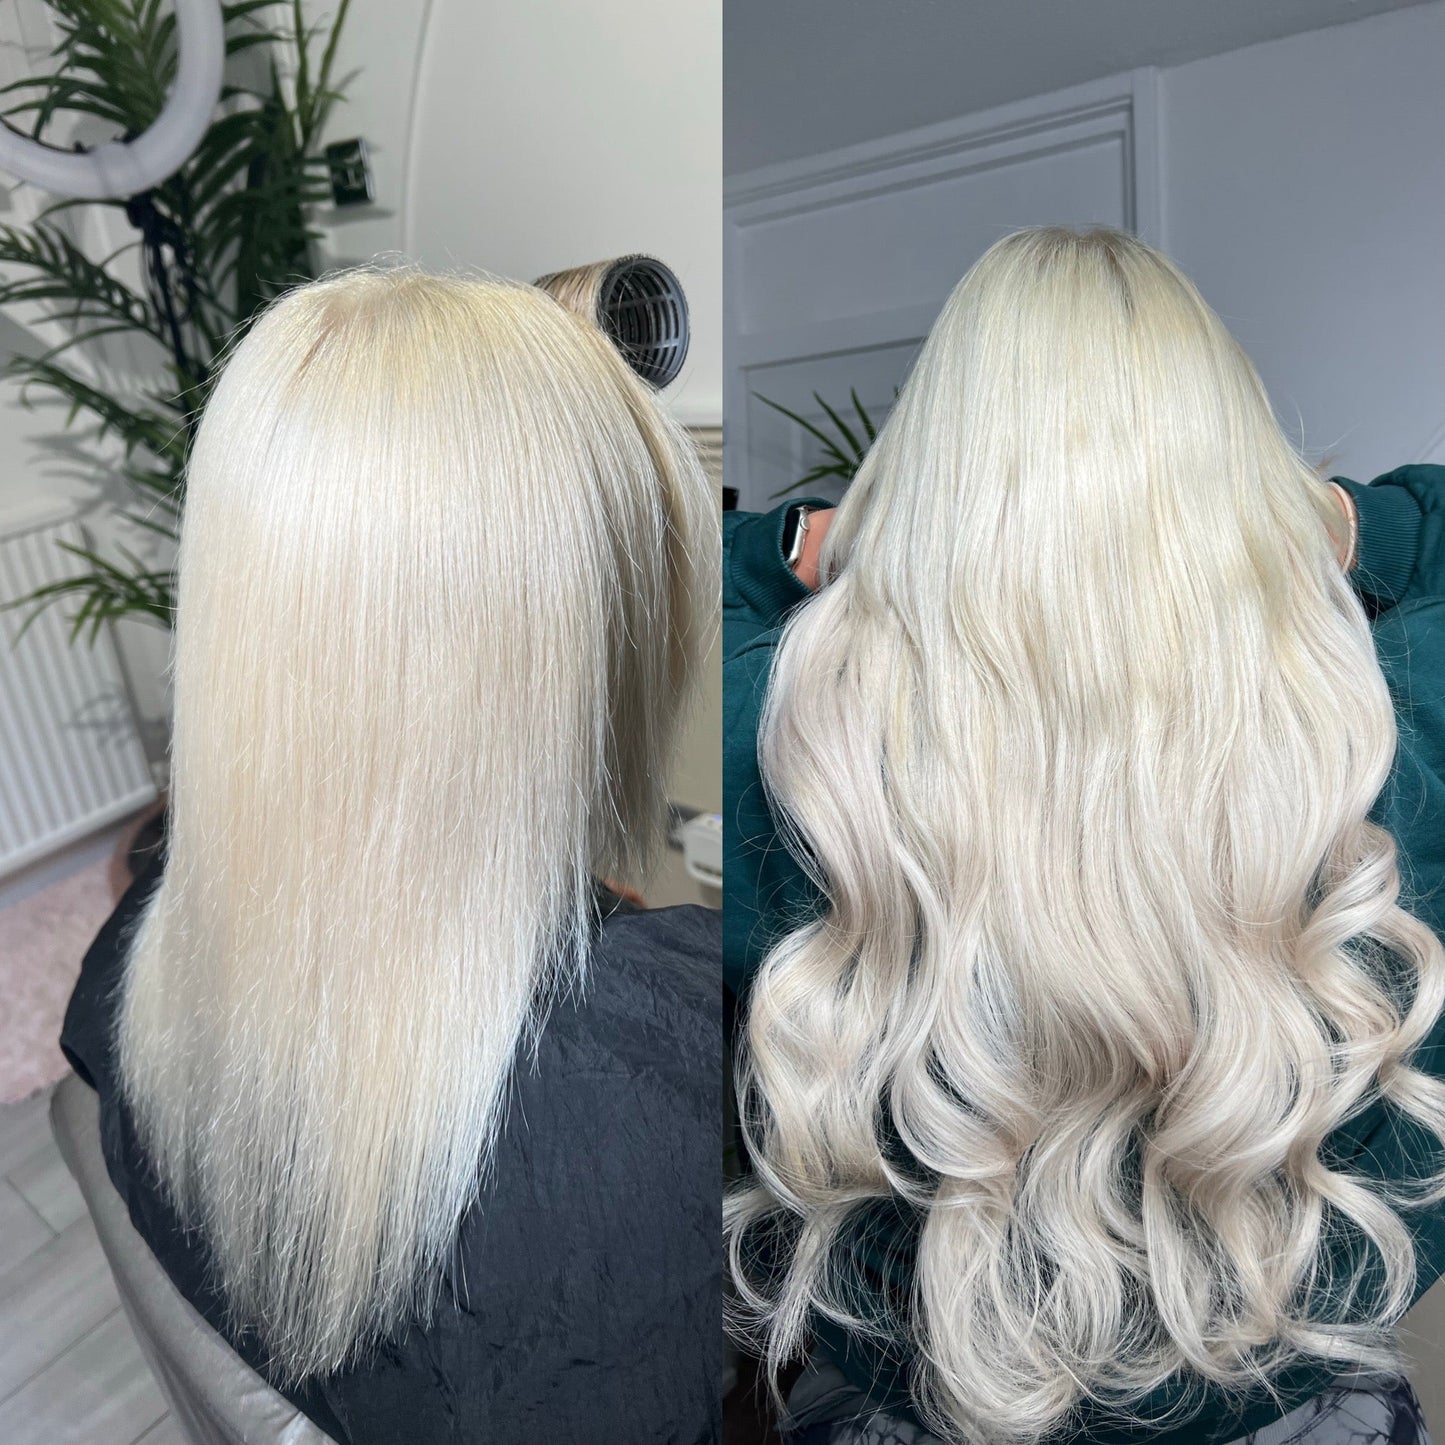 RUSSIAN TAPE IN HAIR EXTENSIONS